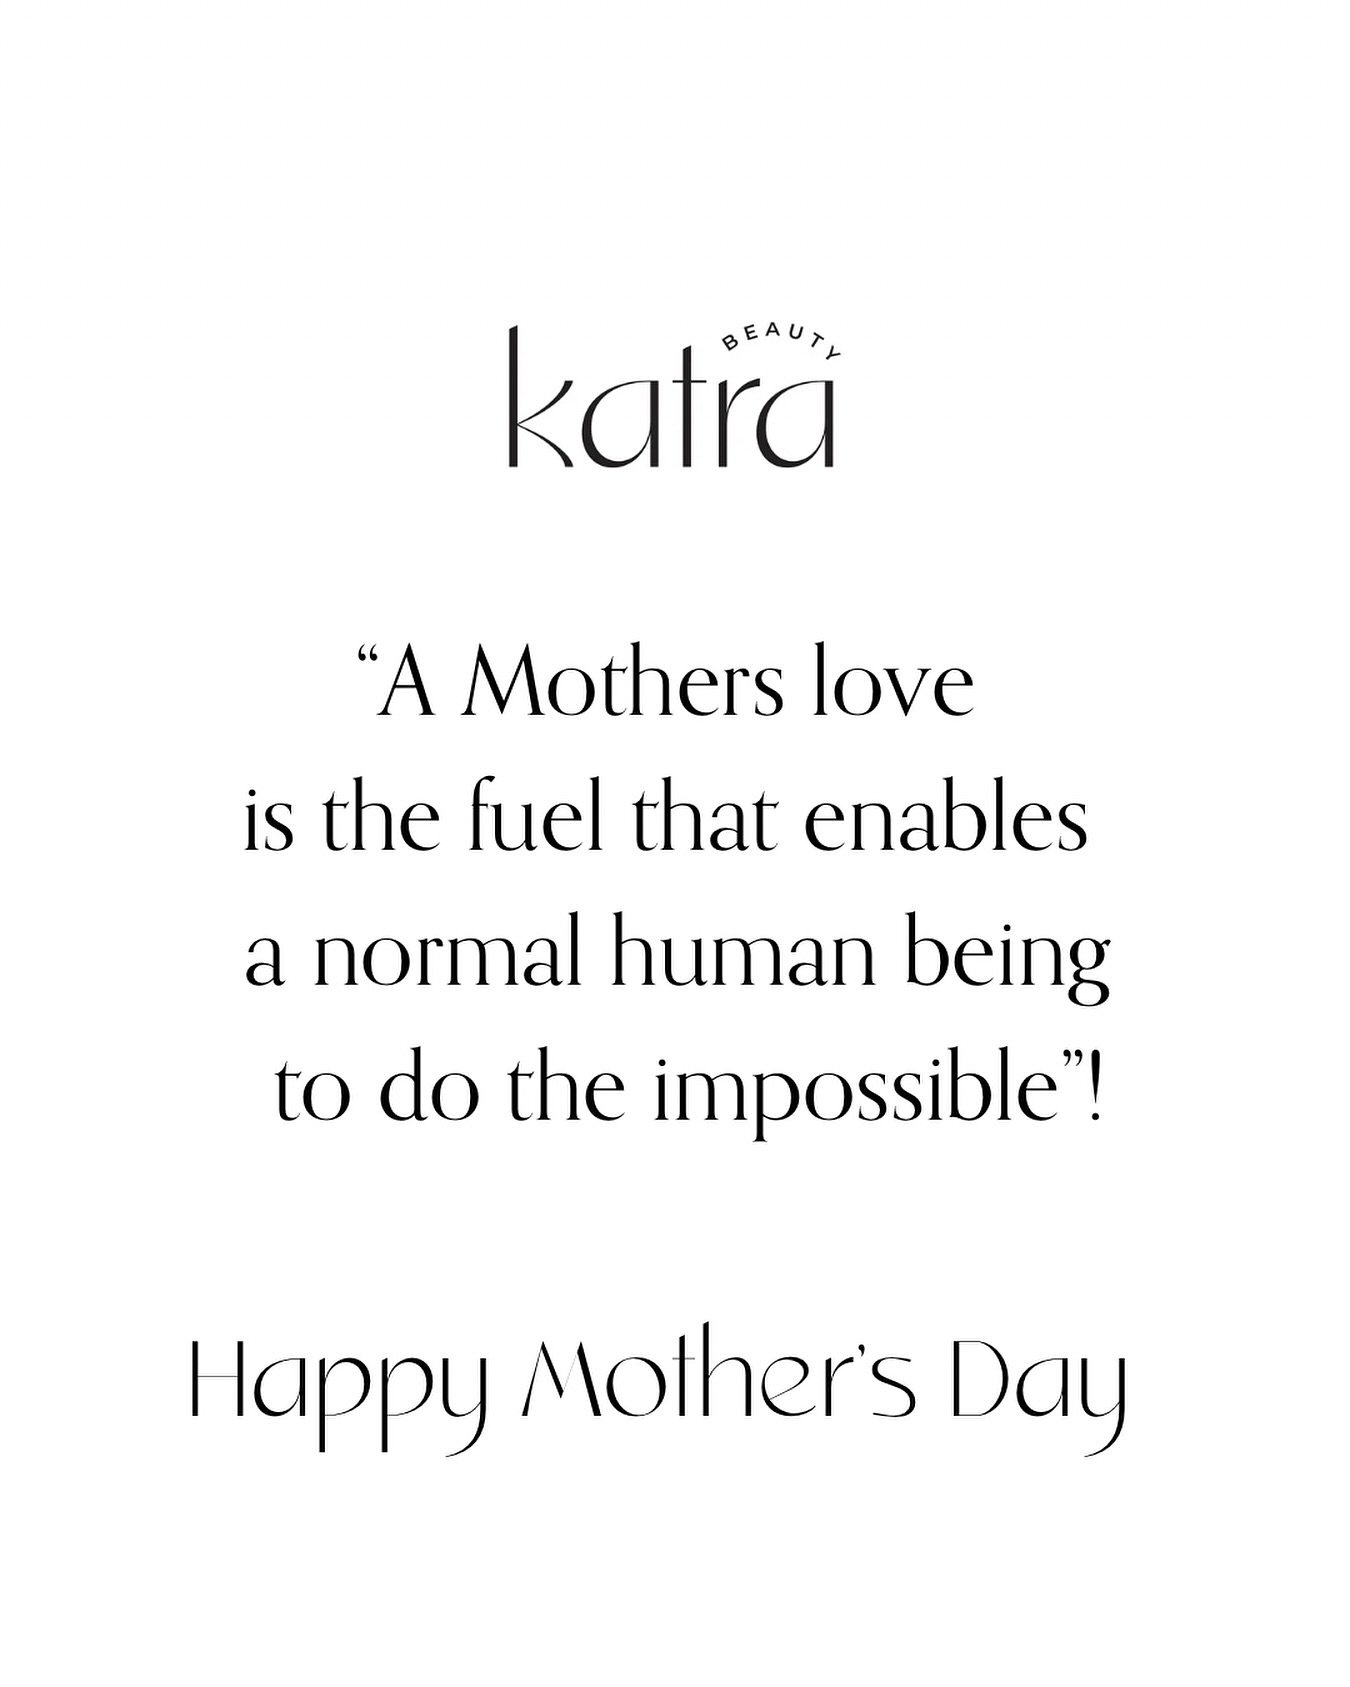 To all the amazing women in our world Happy Mothers Day, we are so grateful for you all ❤️❤️❤️